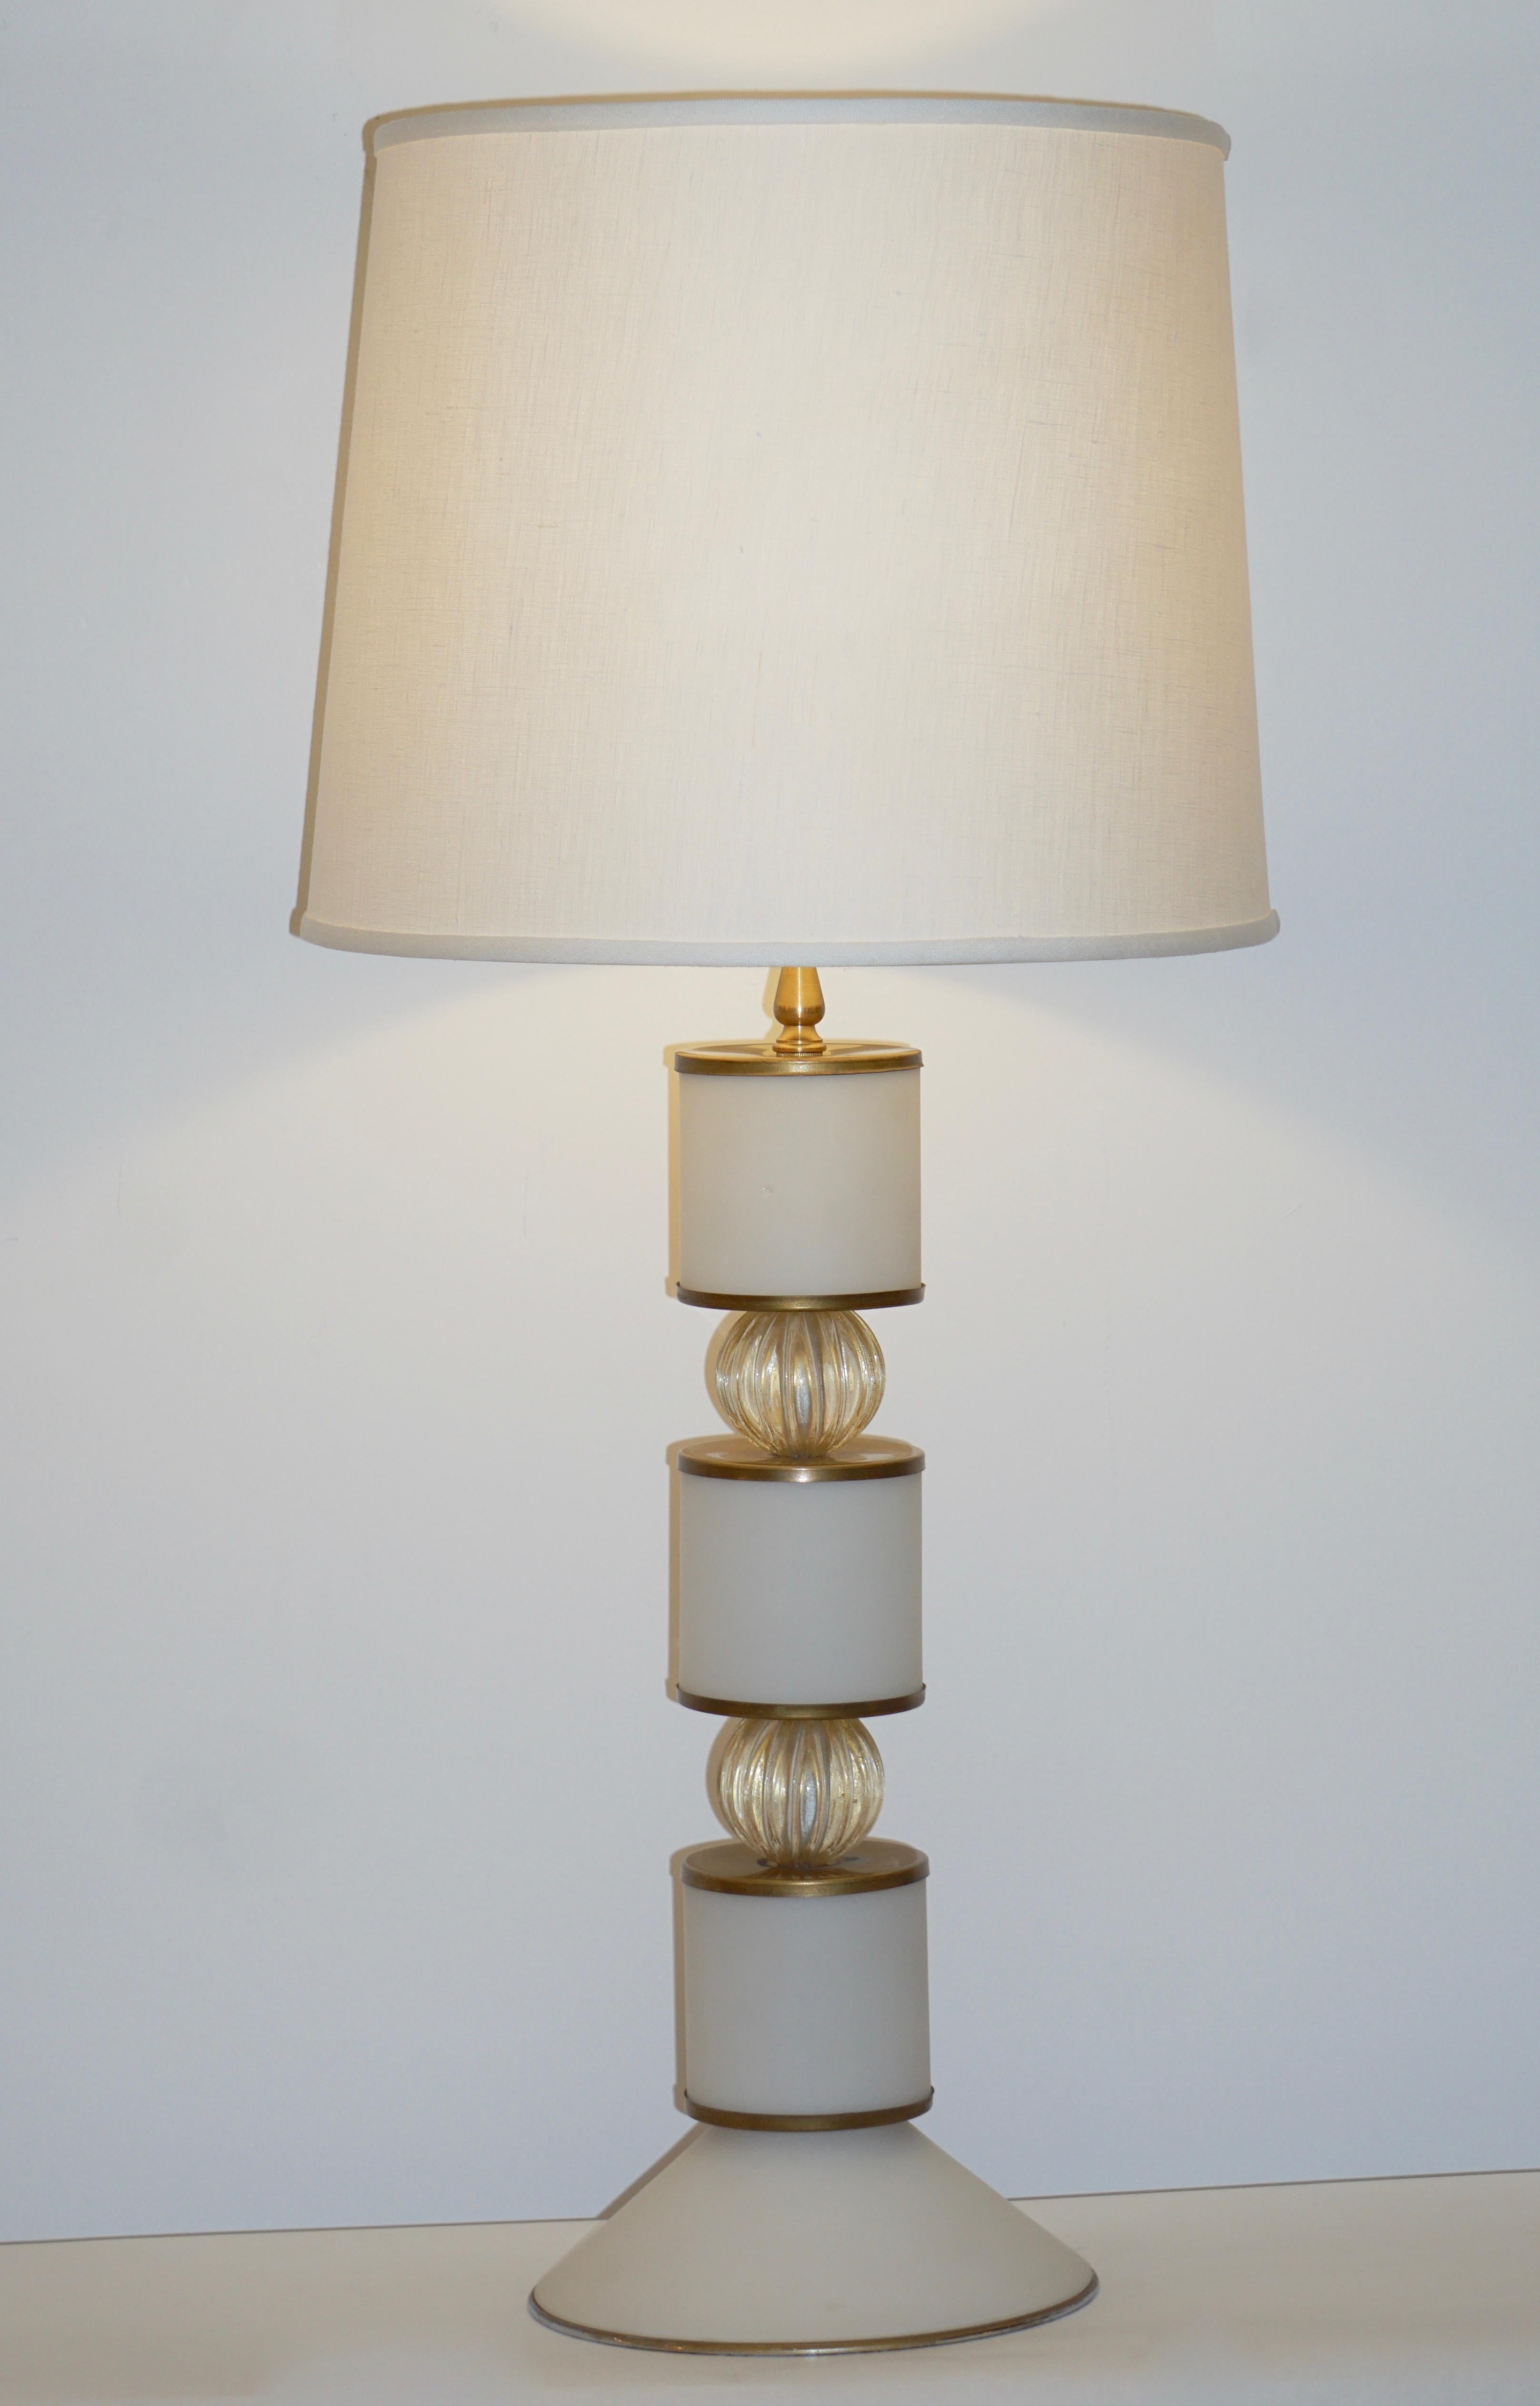 Albarelli Pair of Tall Matte White and Gold Murano Glass Lamps, circa 1960 For Sale 7